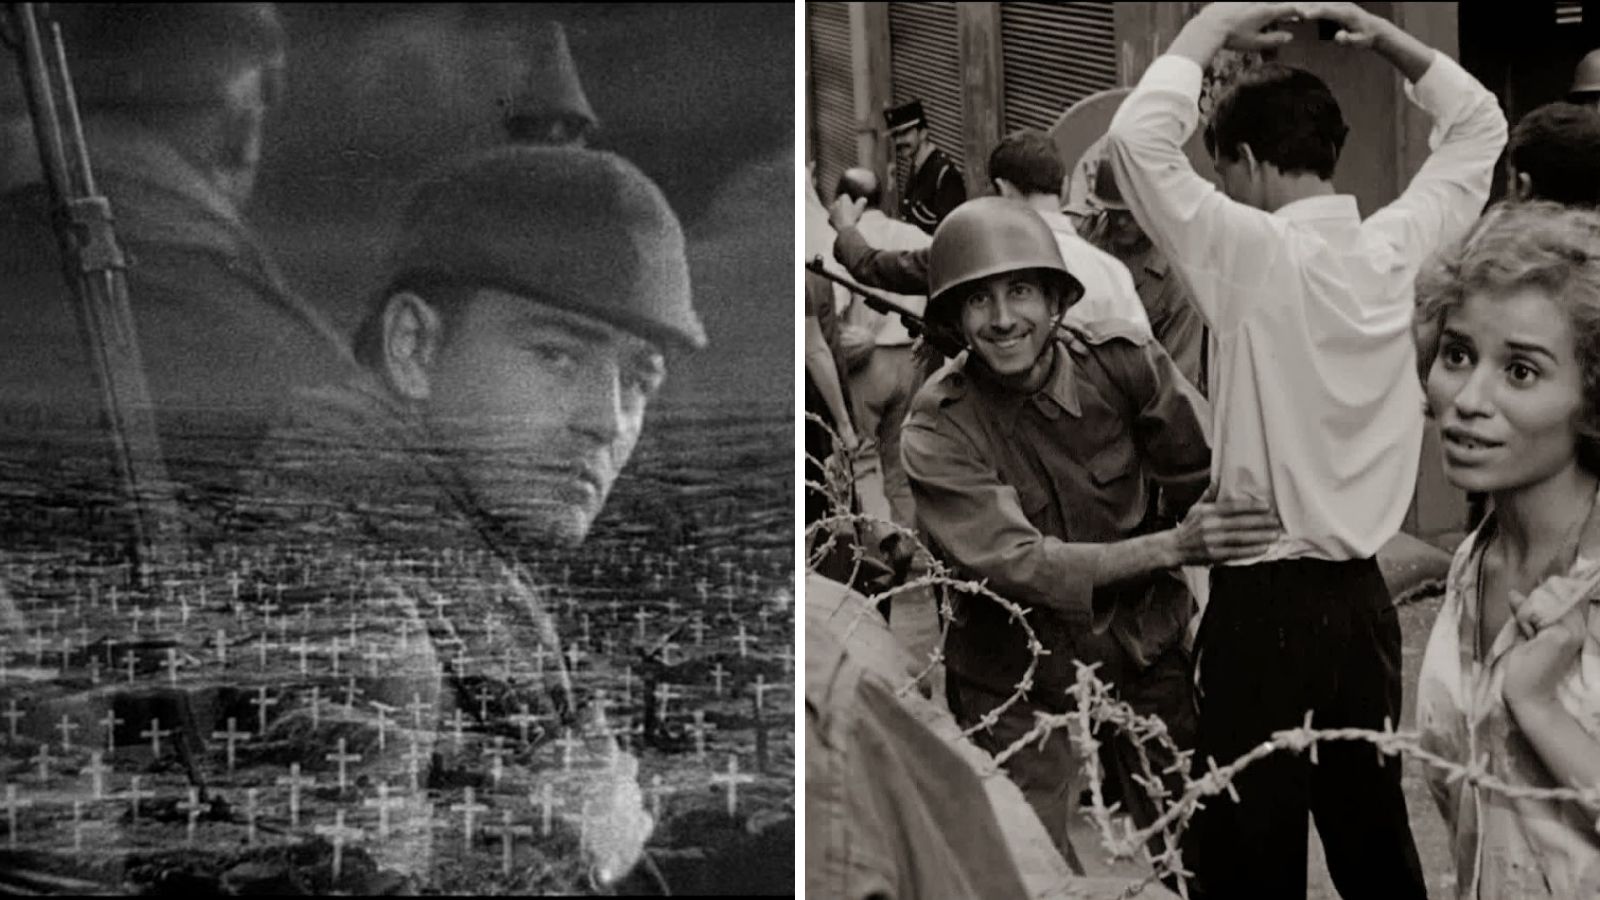 Film still from All Quiet on the Western Front aside a still from The Battle of Algiers